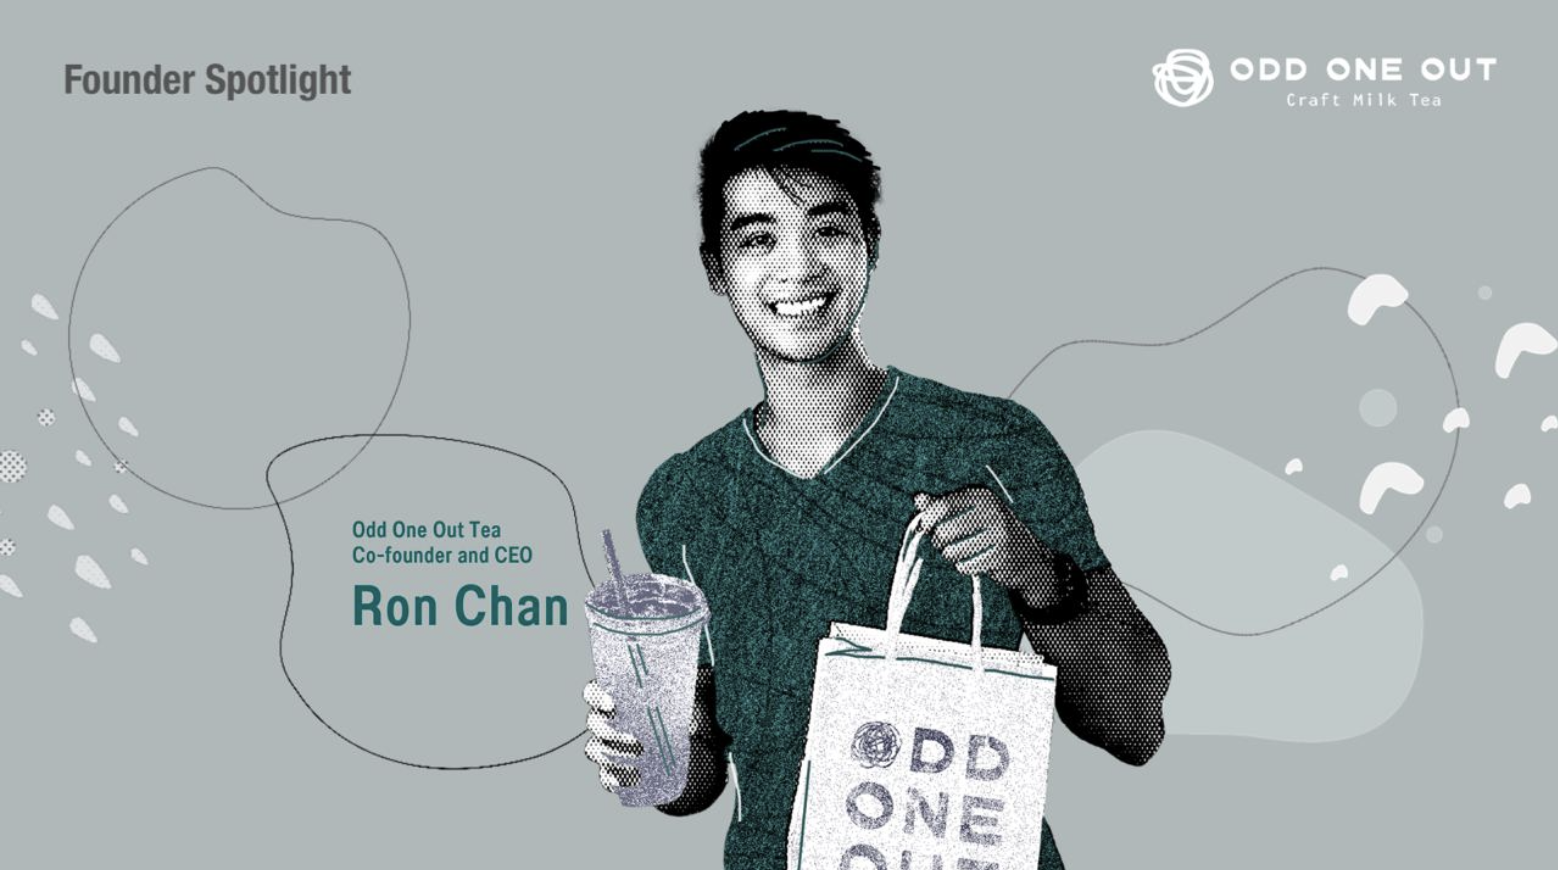 (Odd One Out Founder Ron Chan. Source: Cherubic Ventures)